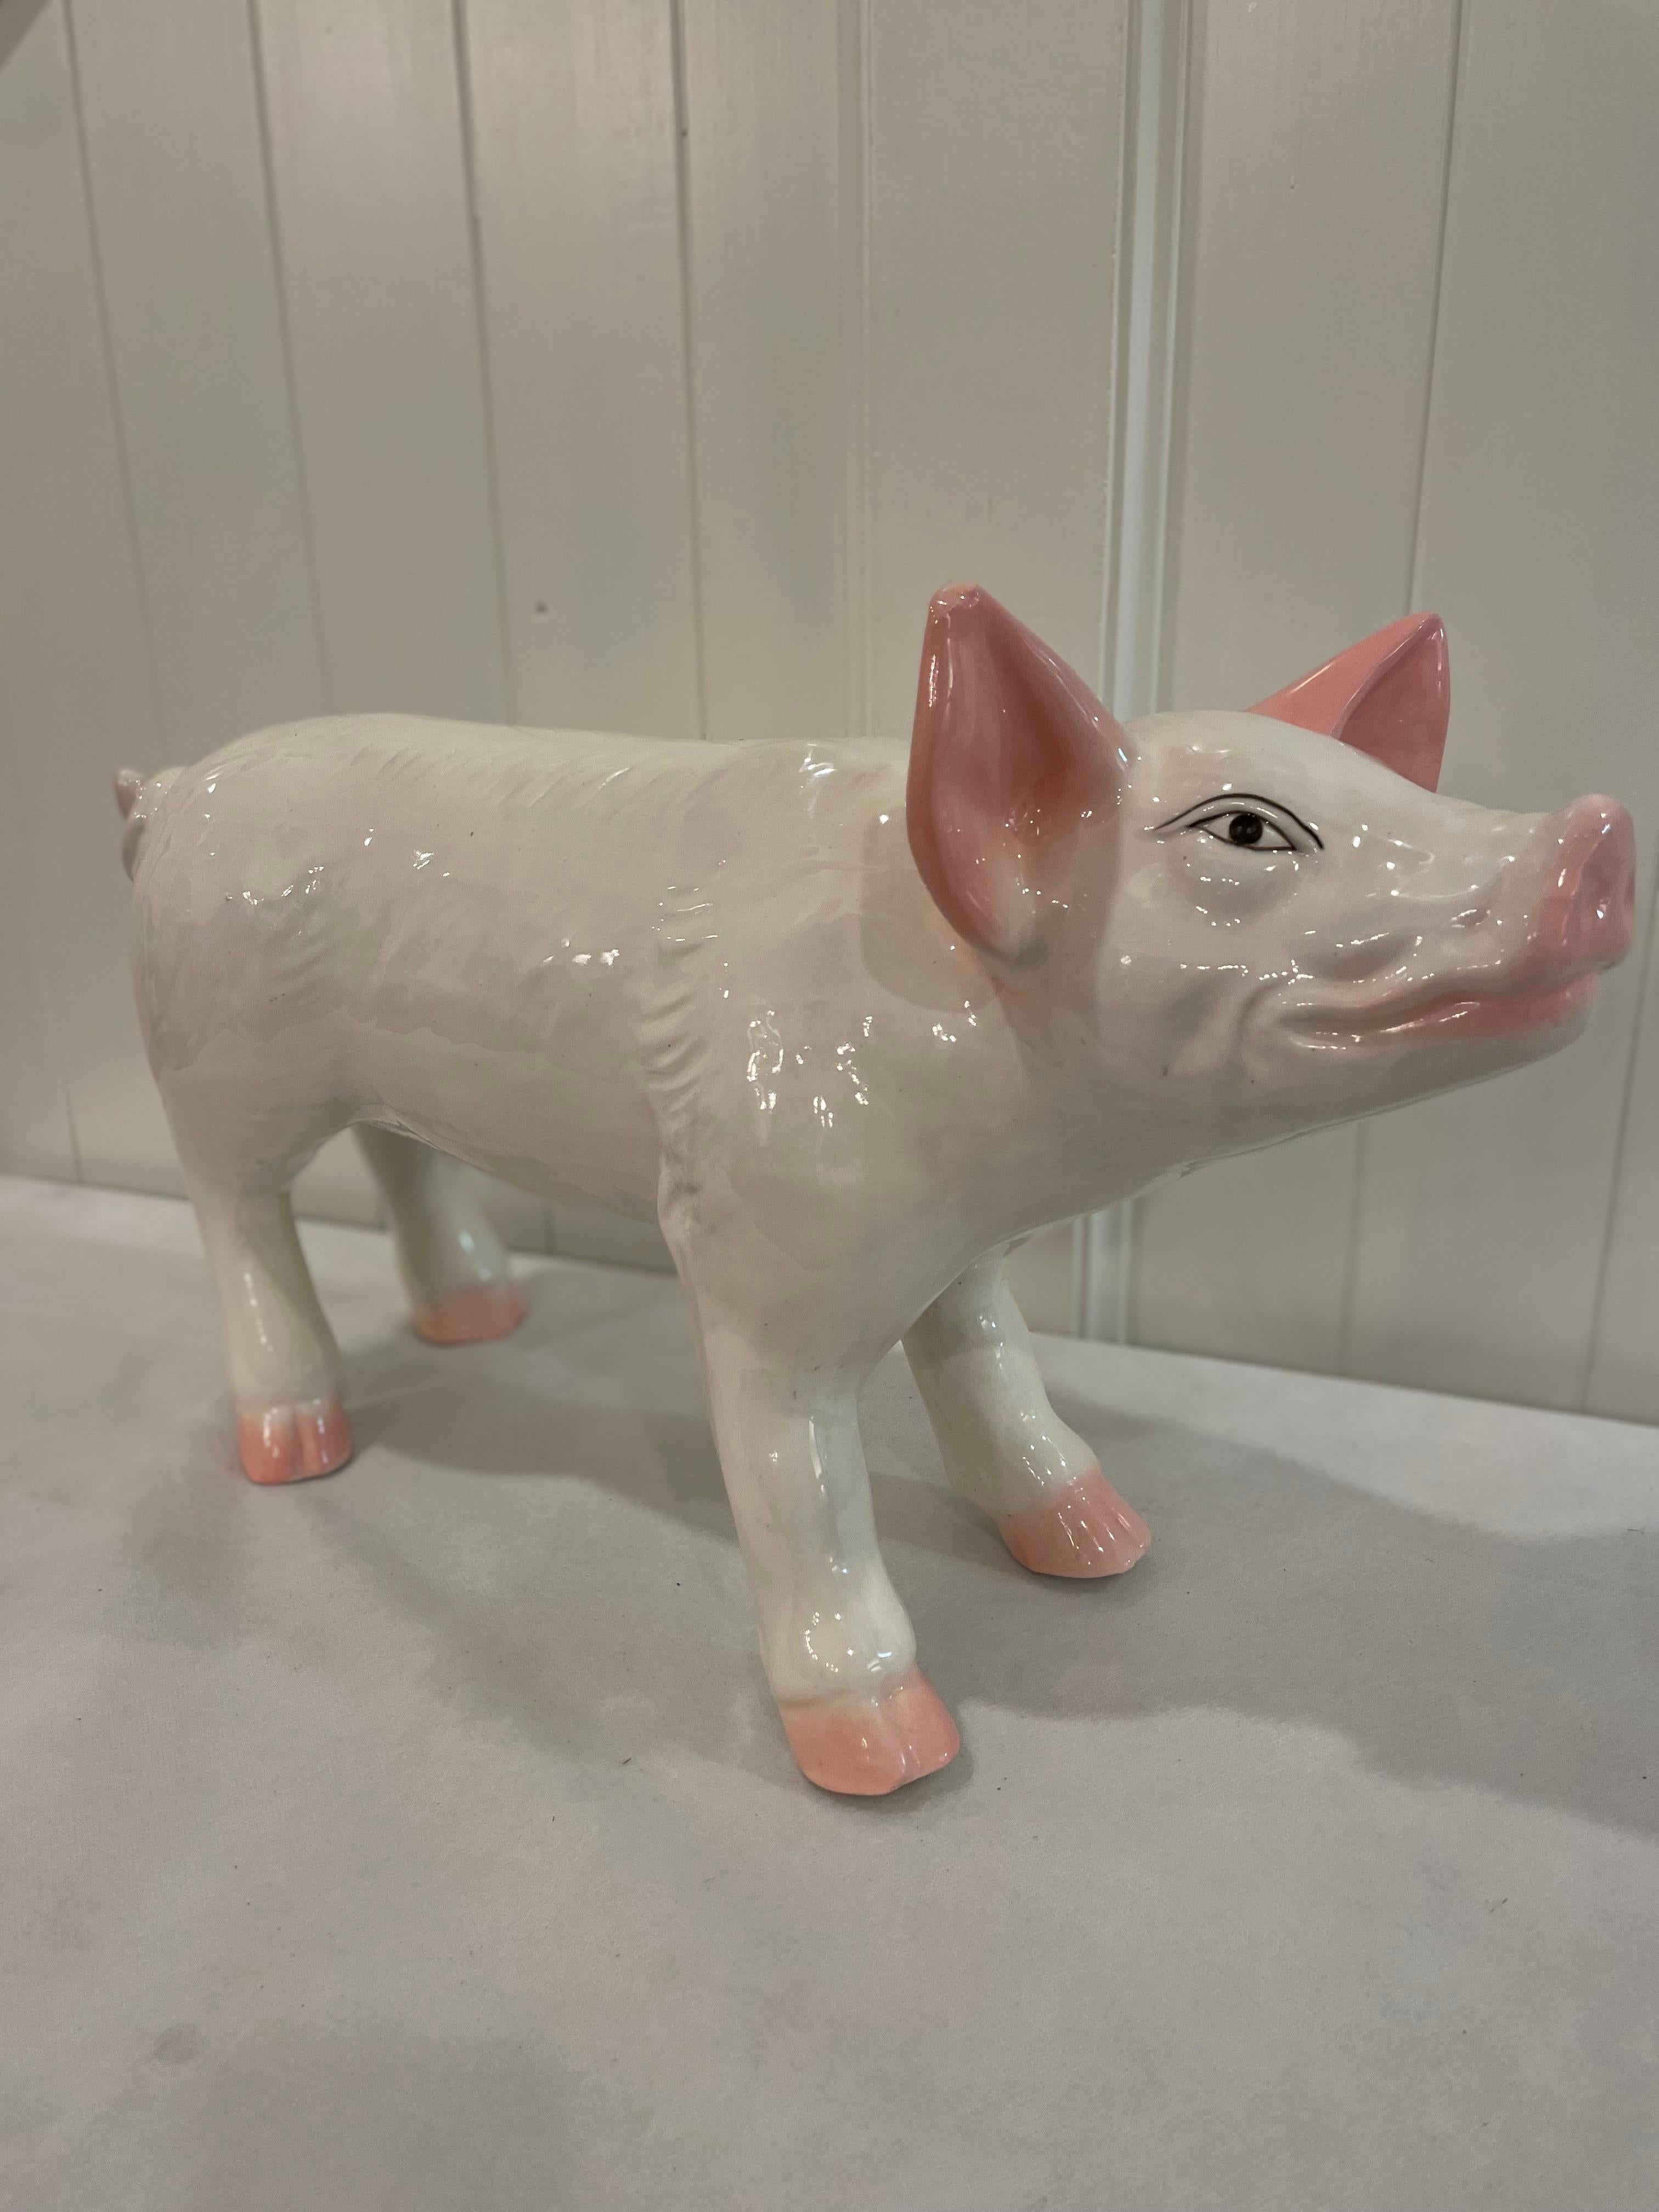 Decorate your kitchen counter with this superb sculptured, ceramic pig. Crafted, circa mid century the large pig figure is colorful, expressive, detailed, and realistic in shape and texture. The picturesque farm animal is in excellent condition with